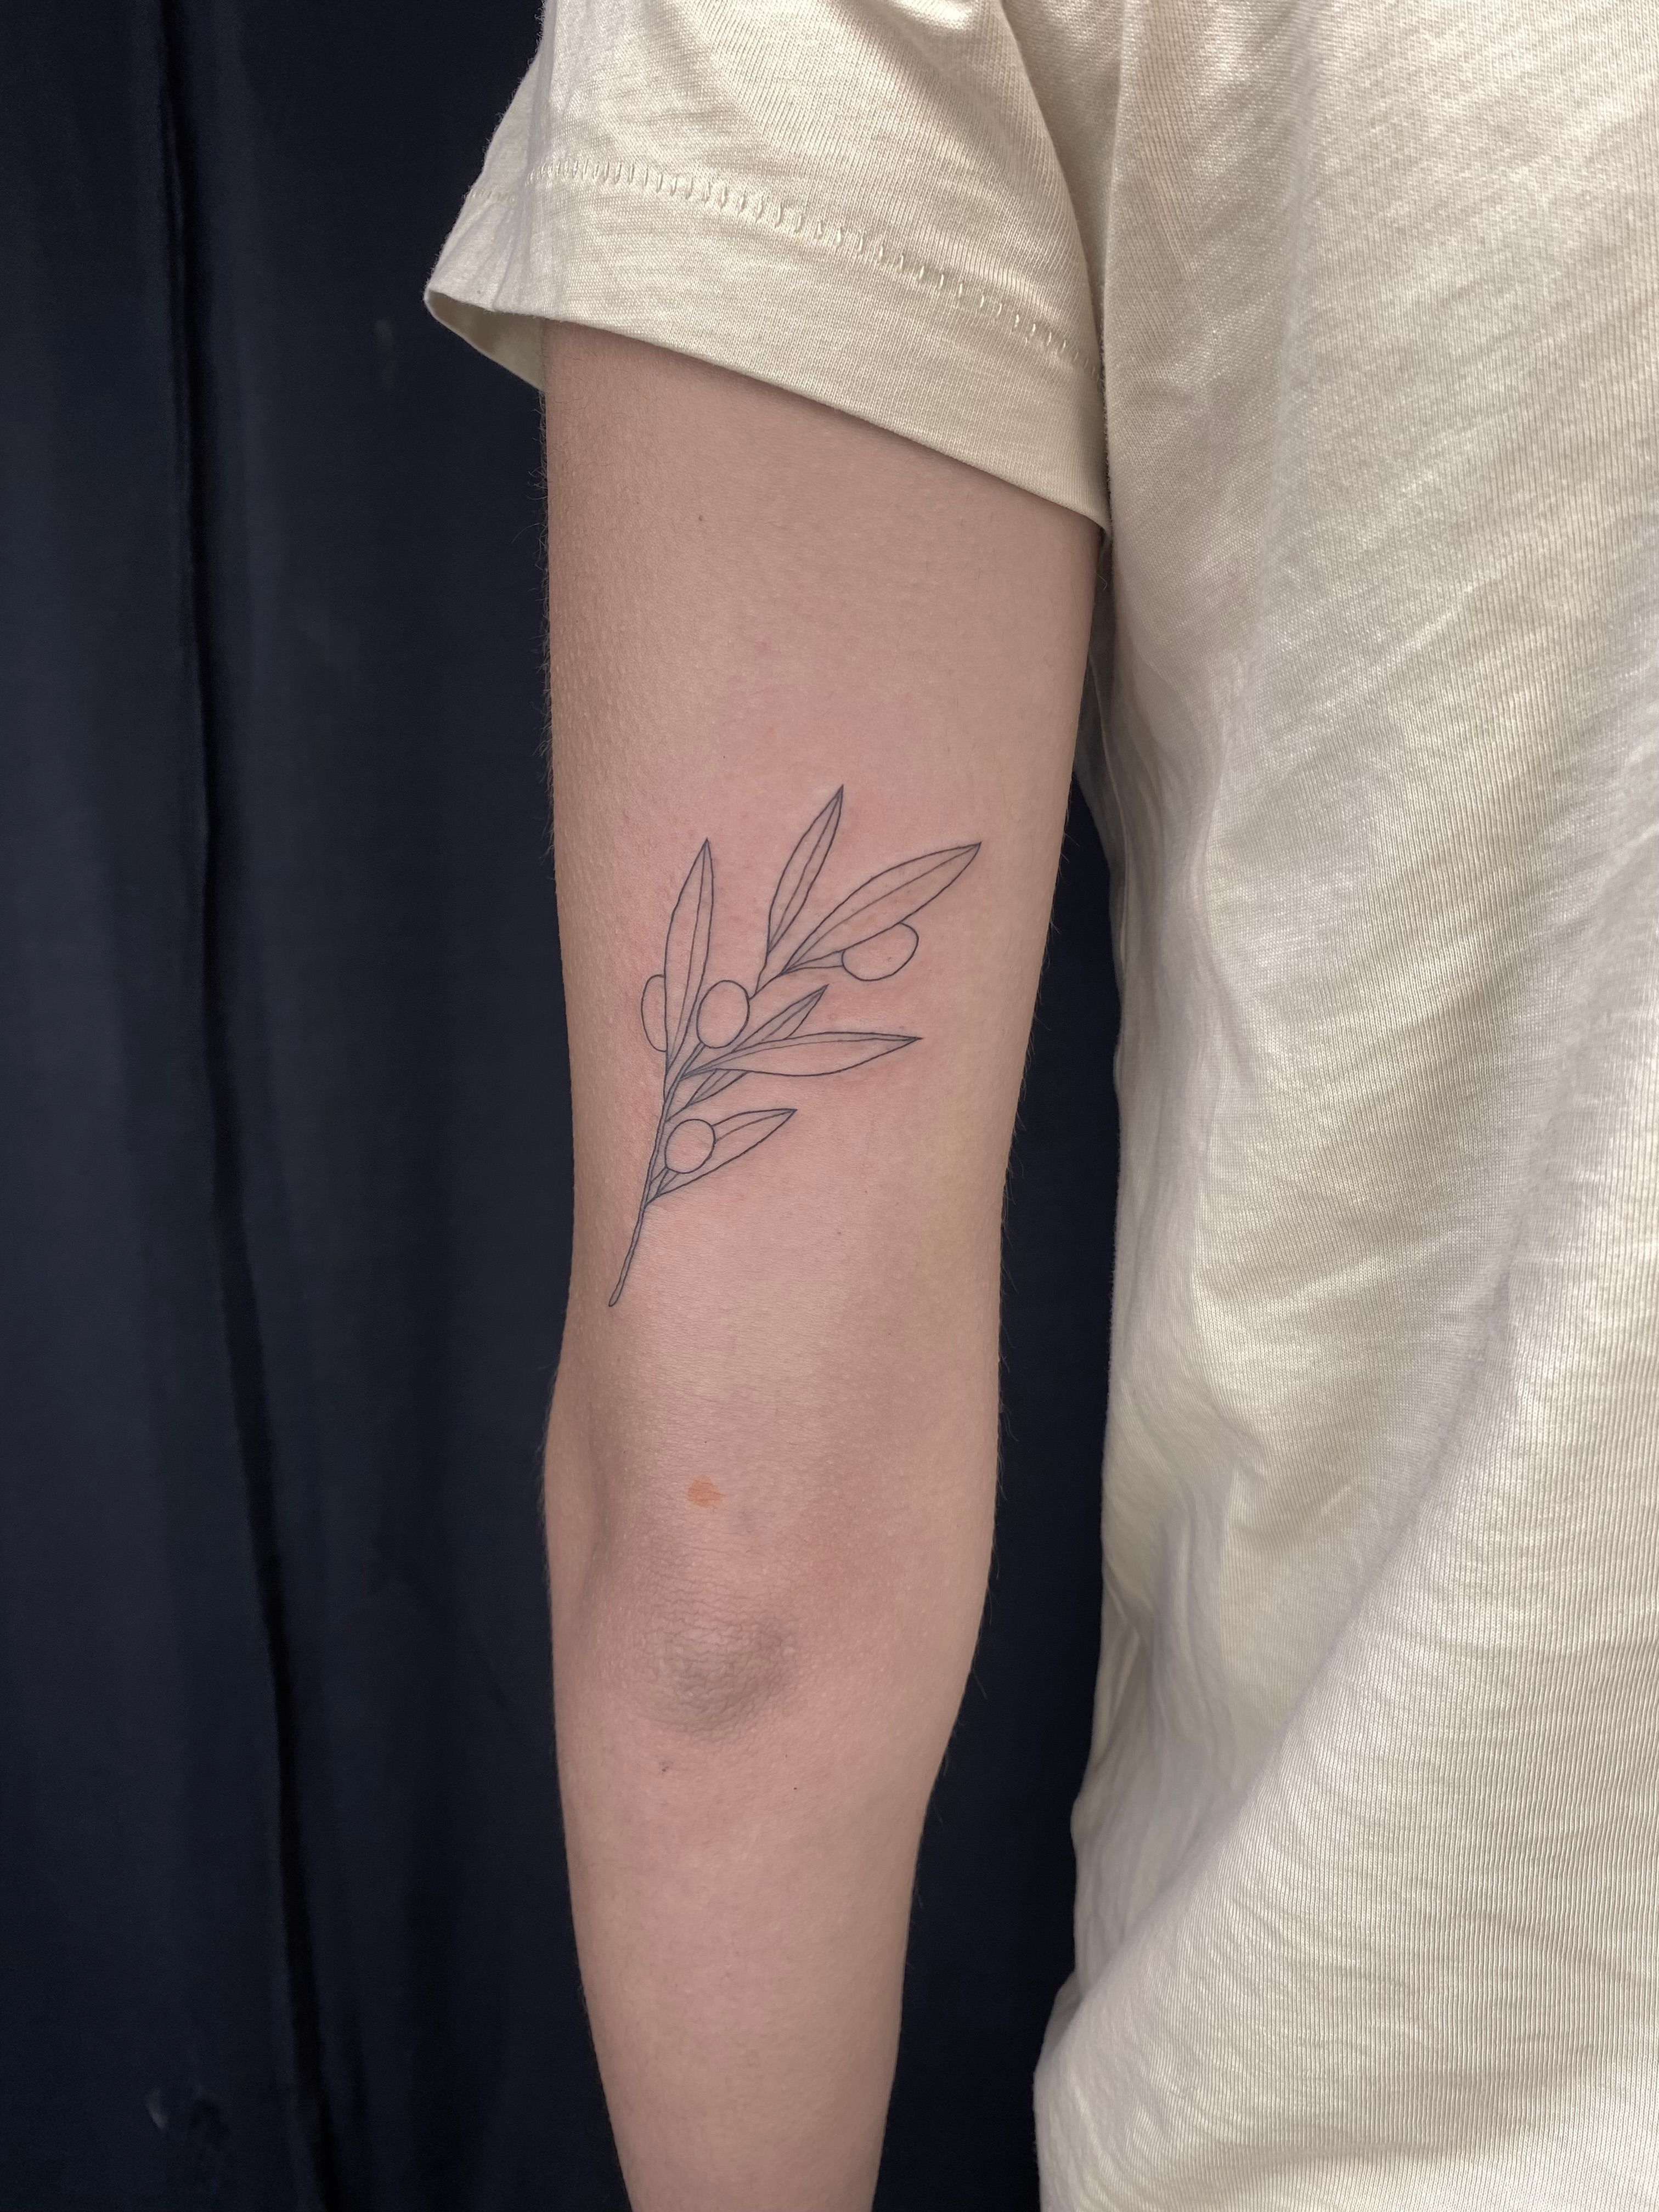 Olive Branch Tattoo - Get an InkGet an Ink